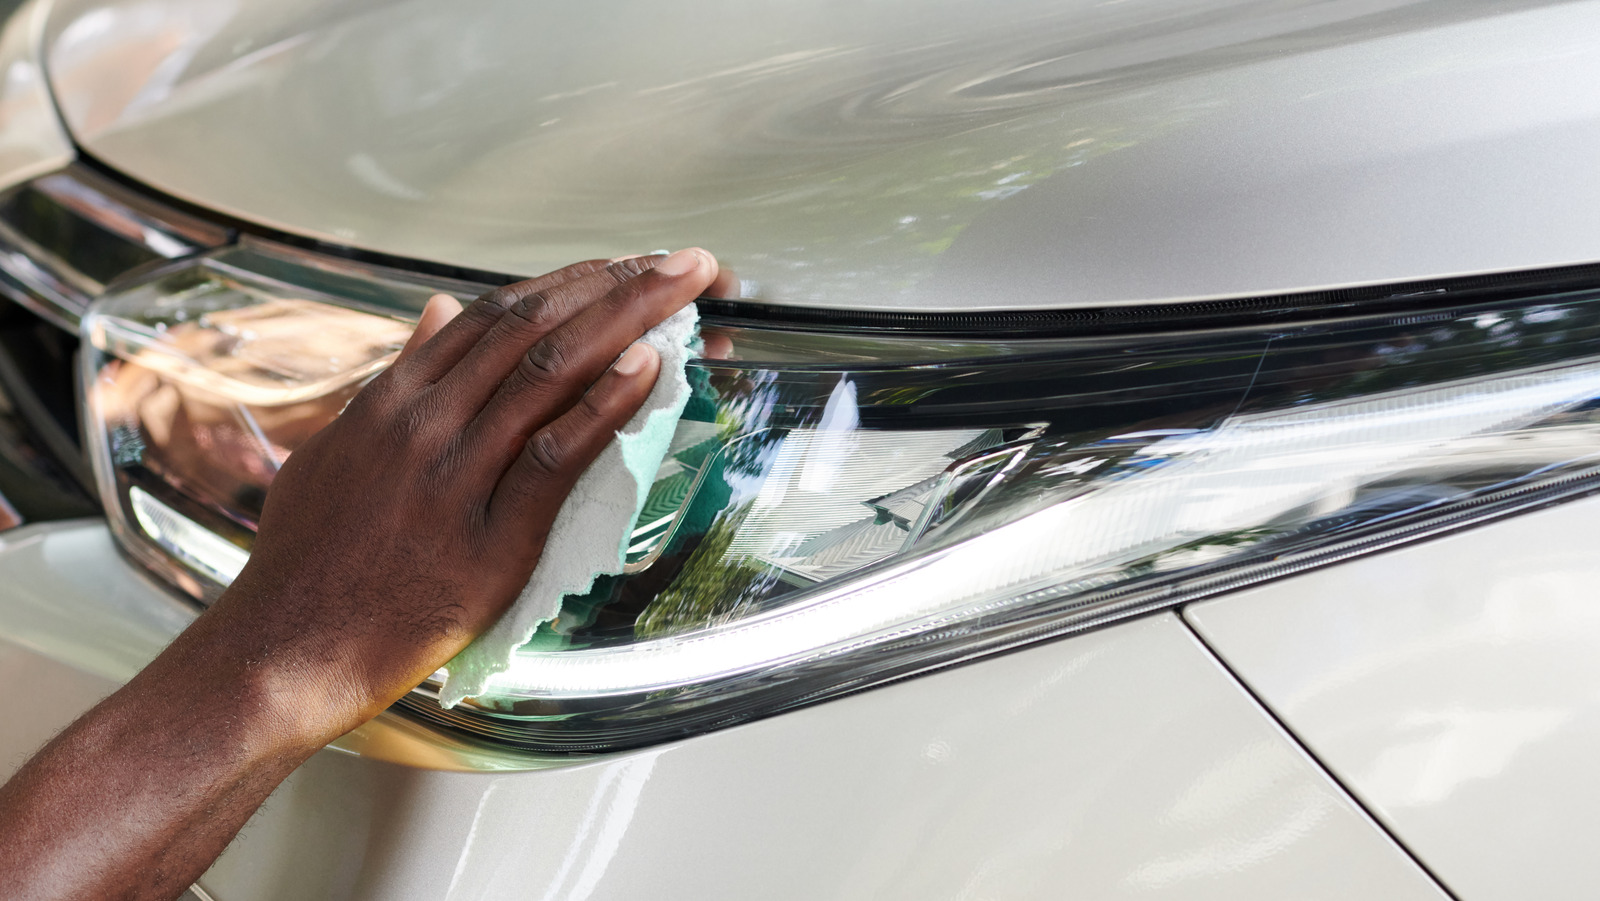 Why People Rub Toothpaste On Their Headlights (And Should You?)